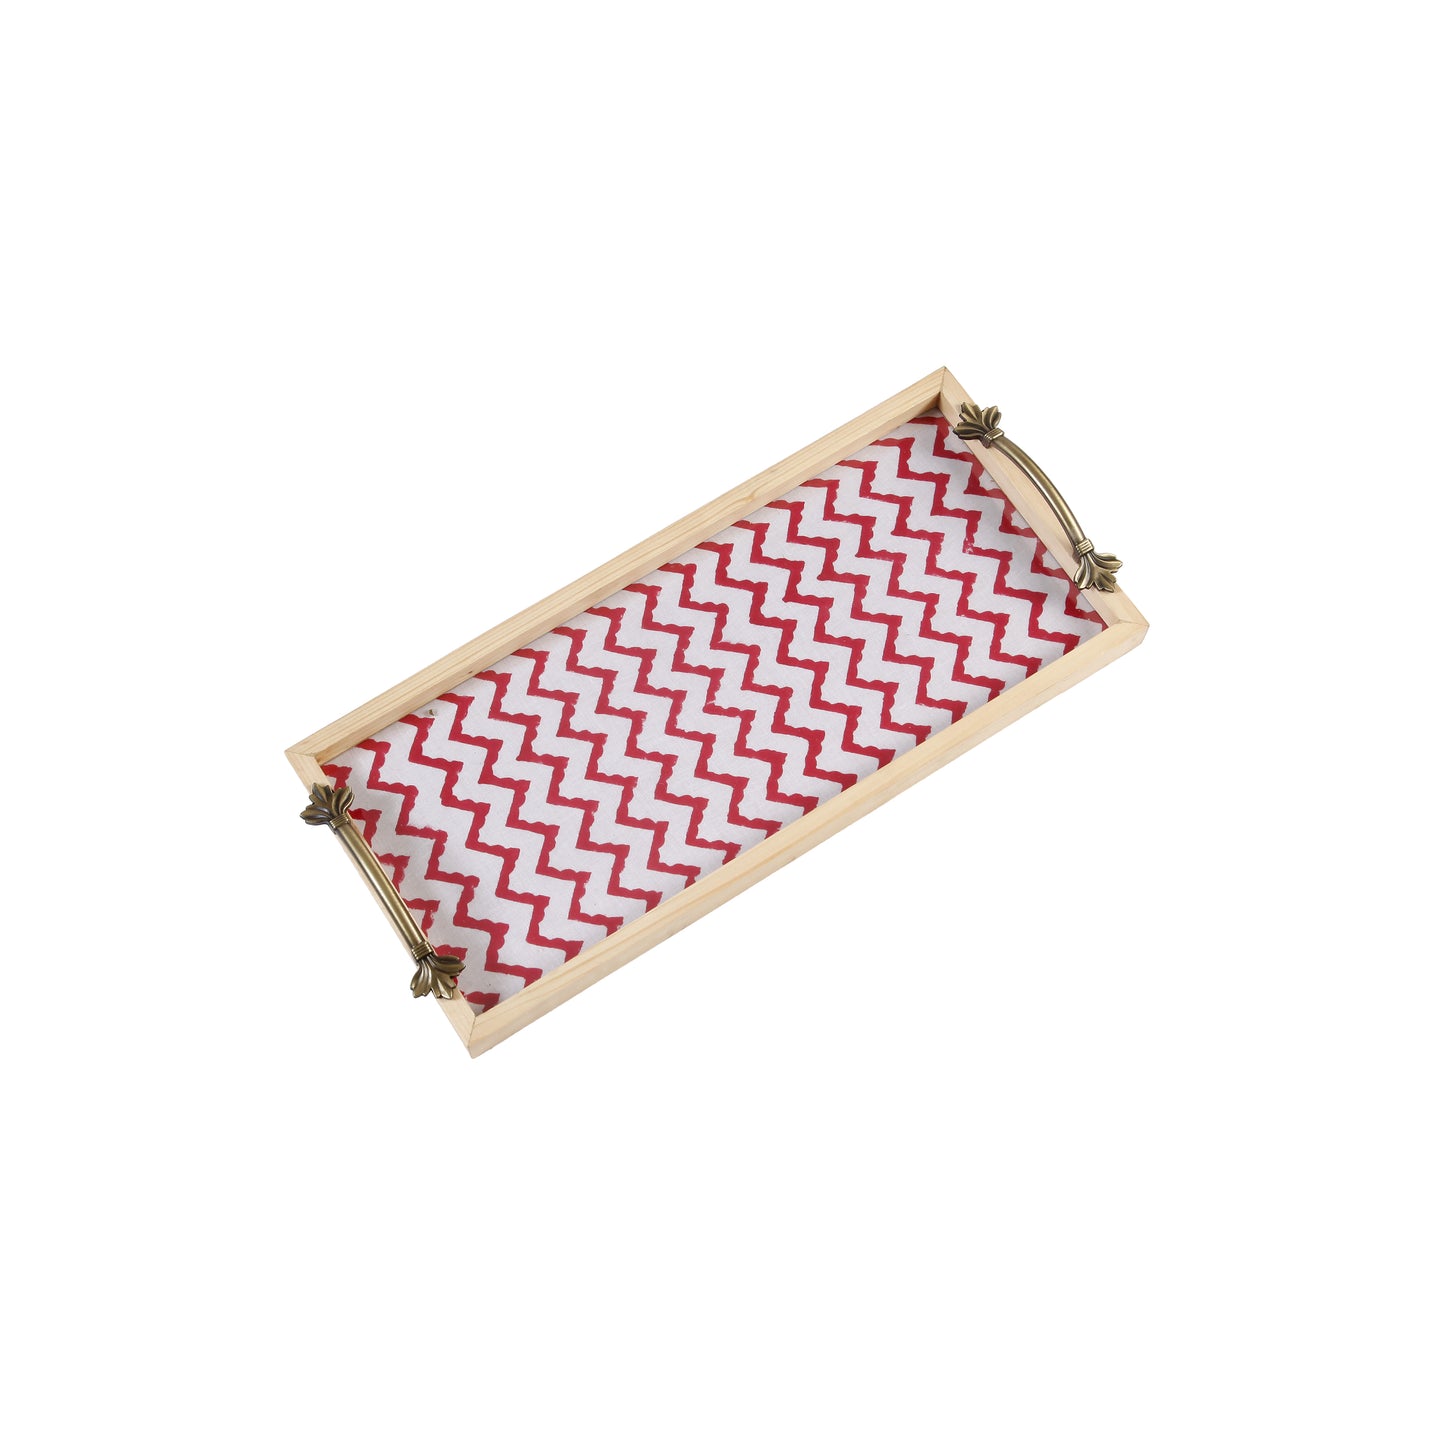 A Tiny Mistake Red Chevron Pine Tray with Handle Serving Pine Wood Tray